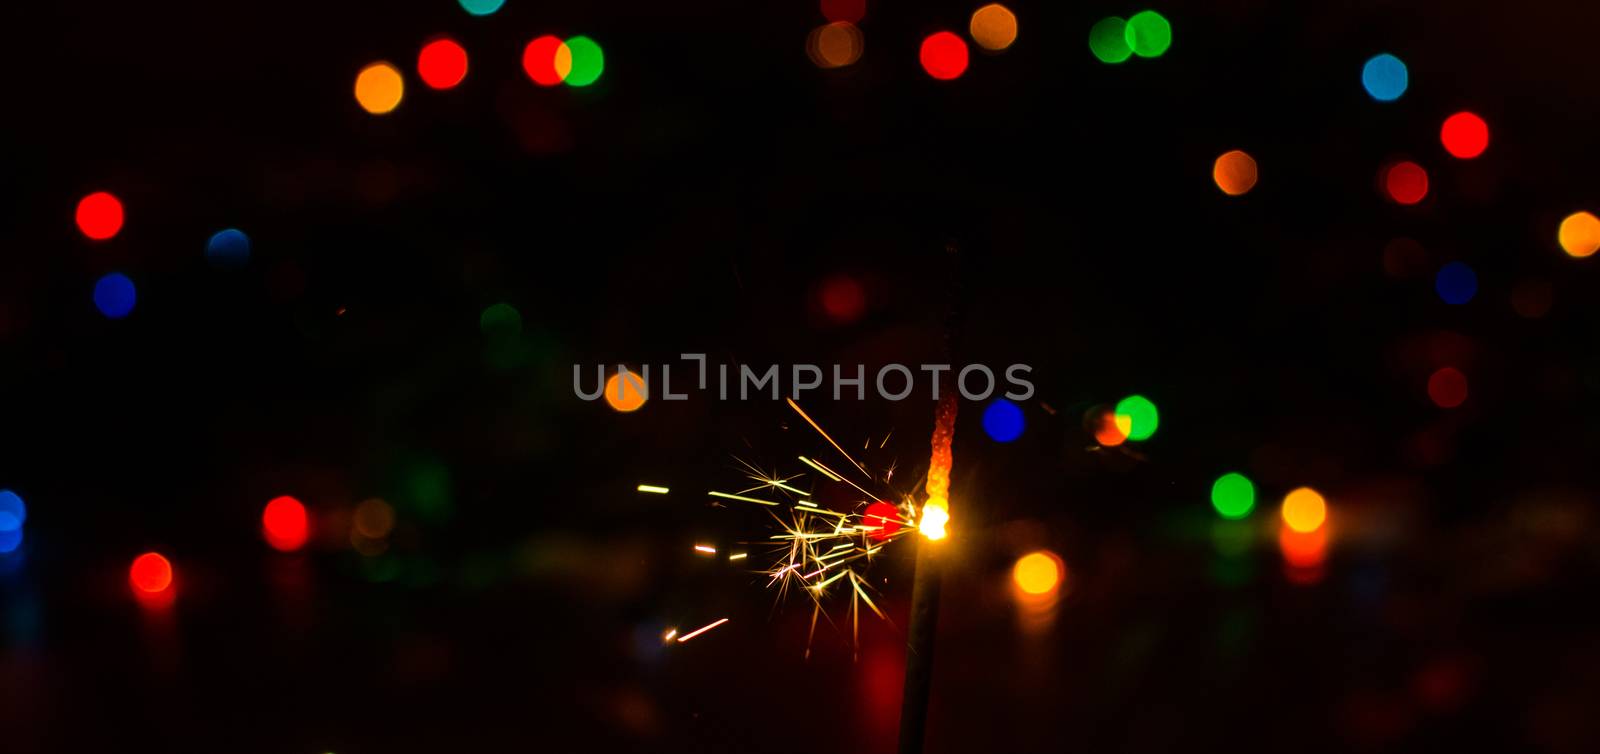 Sparkler and Christmas lights as an ideal background